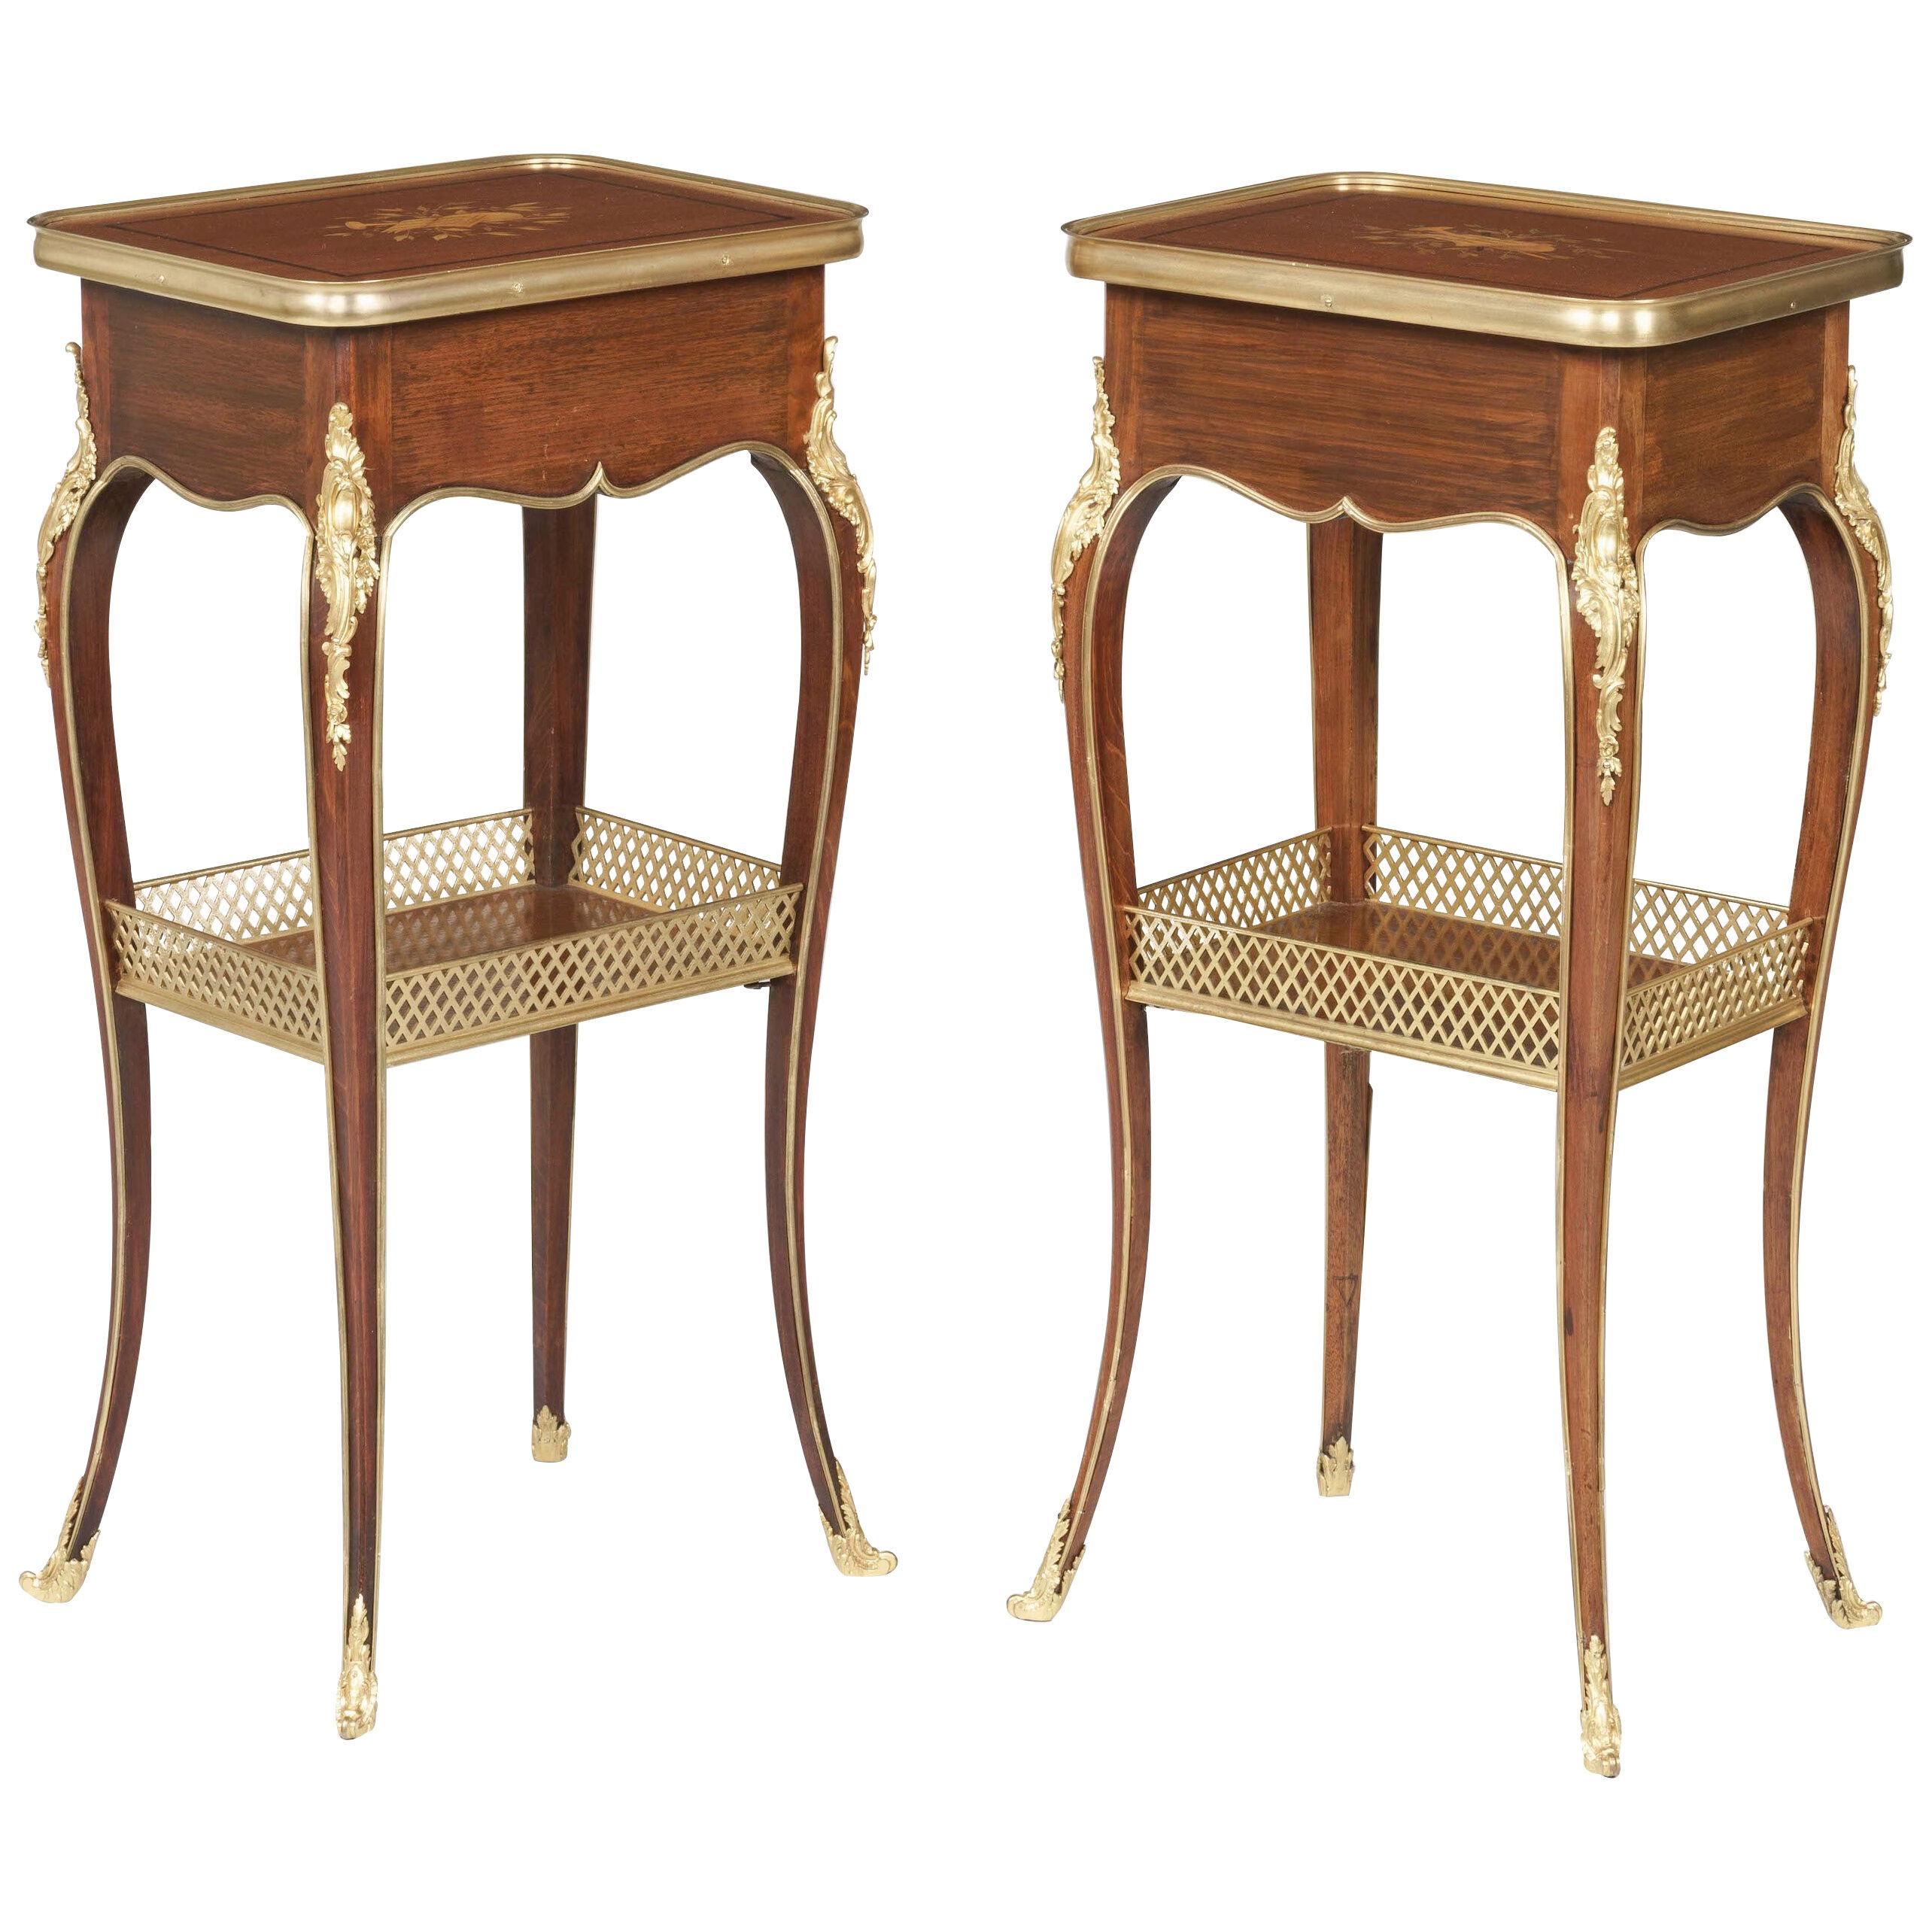 Matched Pair of 19th Century Ormolu-Mounted Tables in the Transitional Style